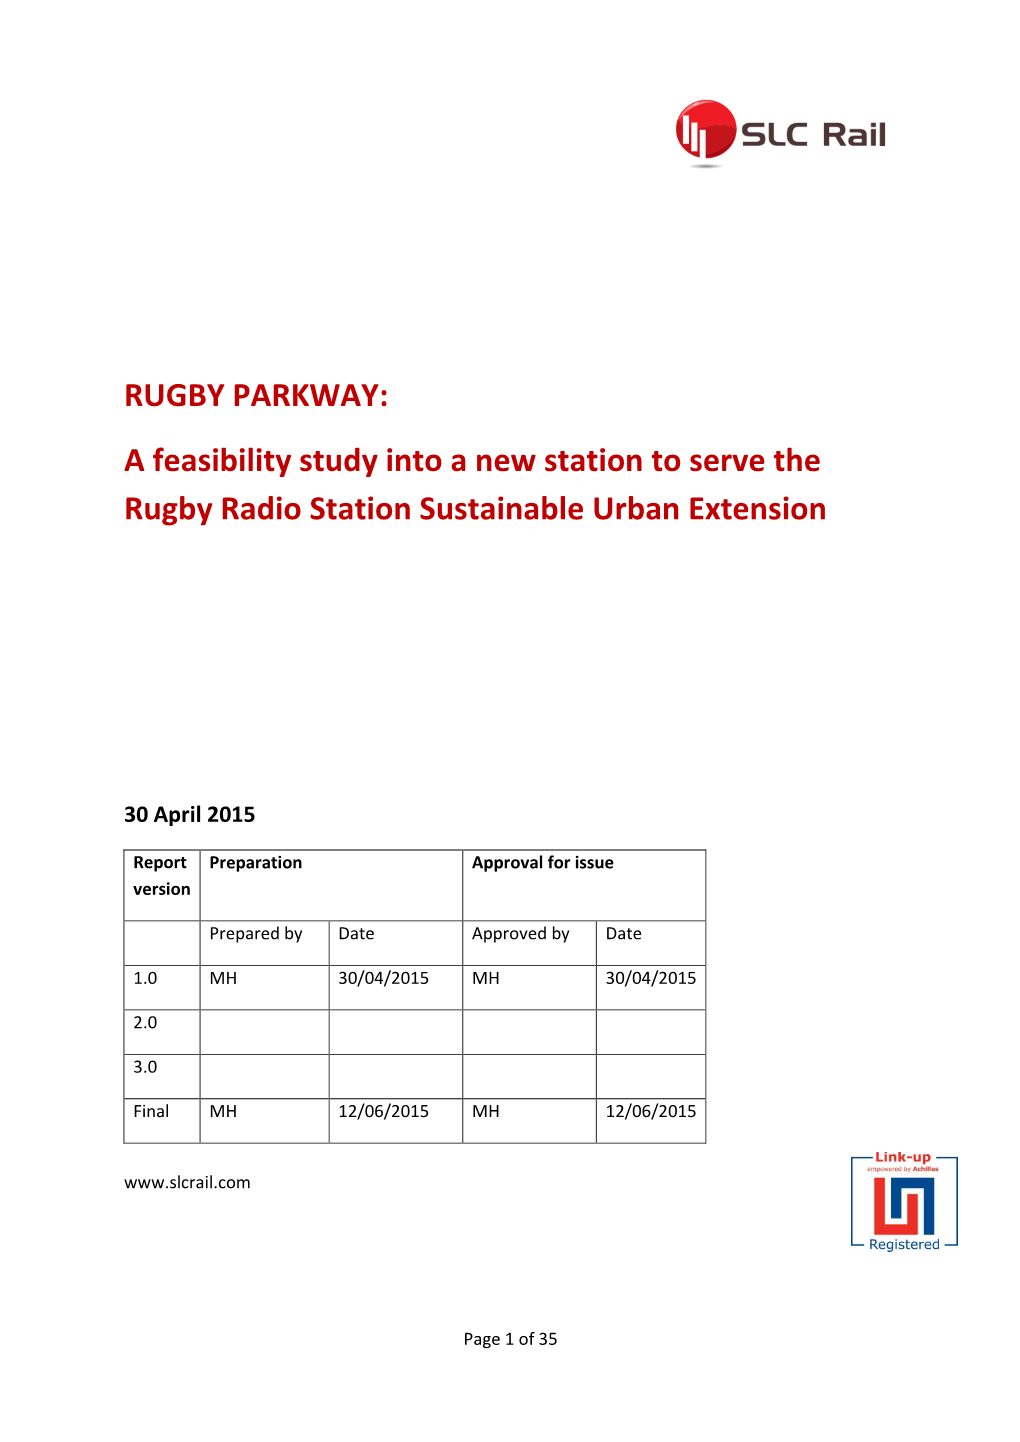 RUGBY PARKWAY: a Feasibility Study Into a New Station to Serve the Rugby Radio Station Sustainable Urban Extension